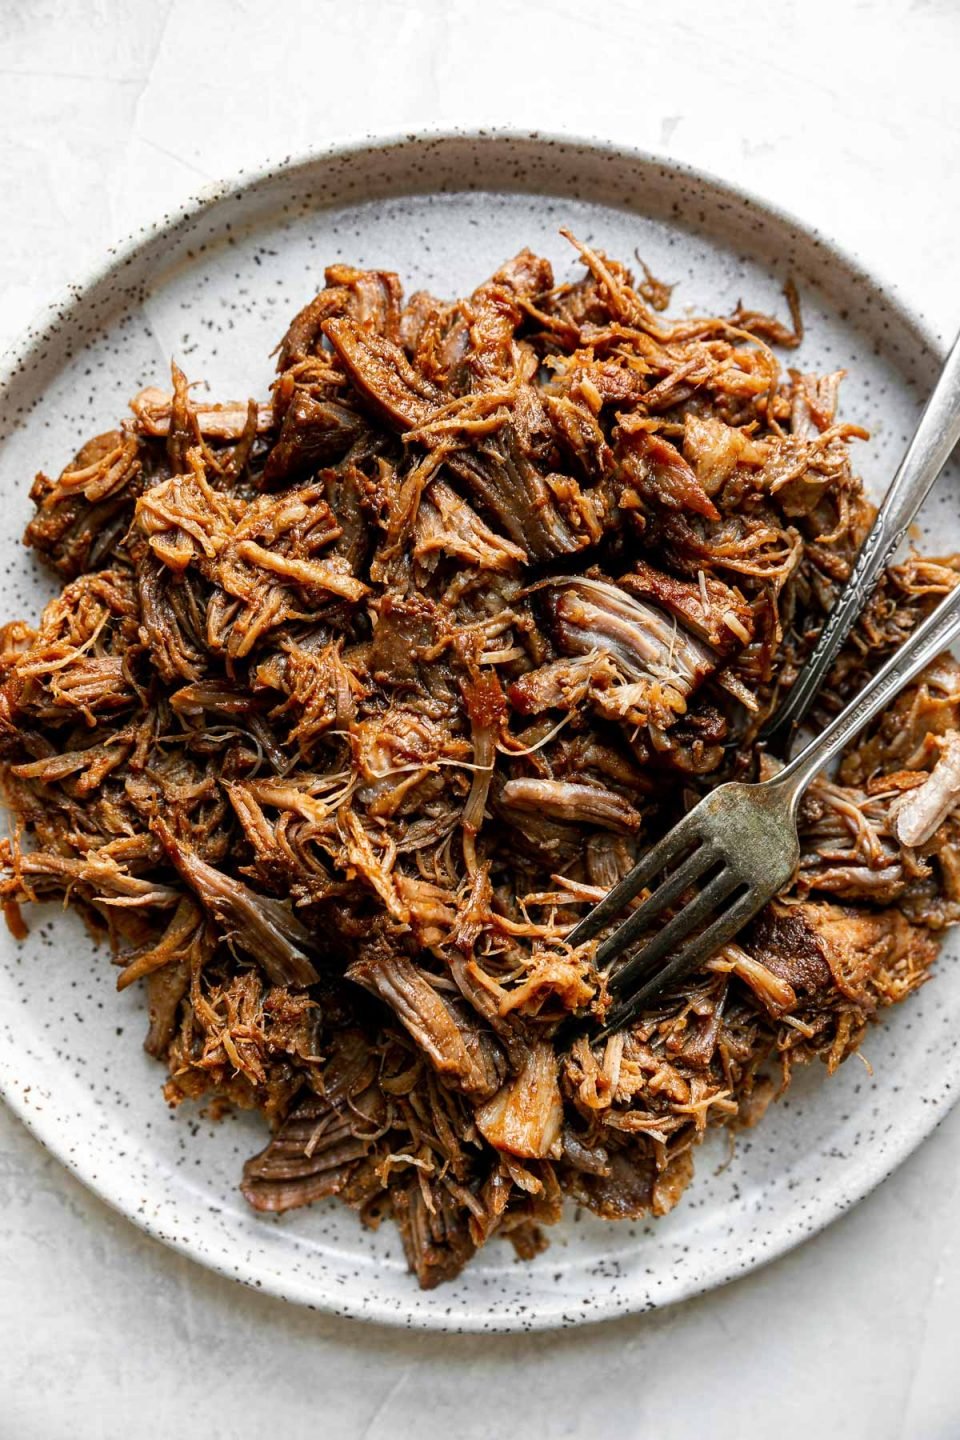 Close up of bbq pulled pork shown on a speckled ceramic plate, with 2 forks. The plate sits atop a creamy cement surface.